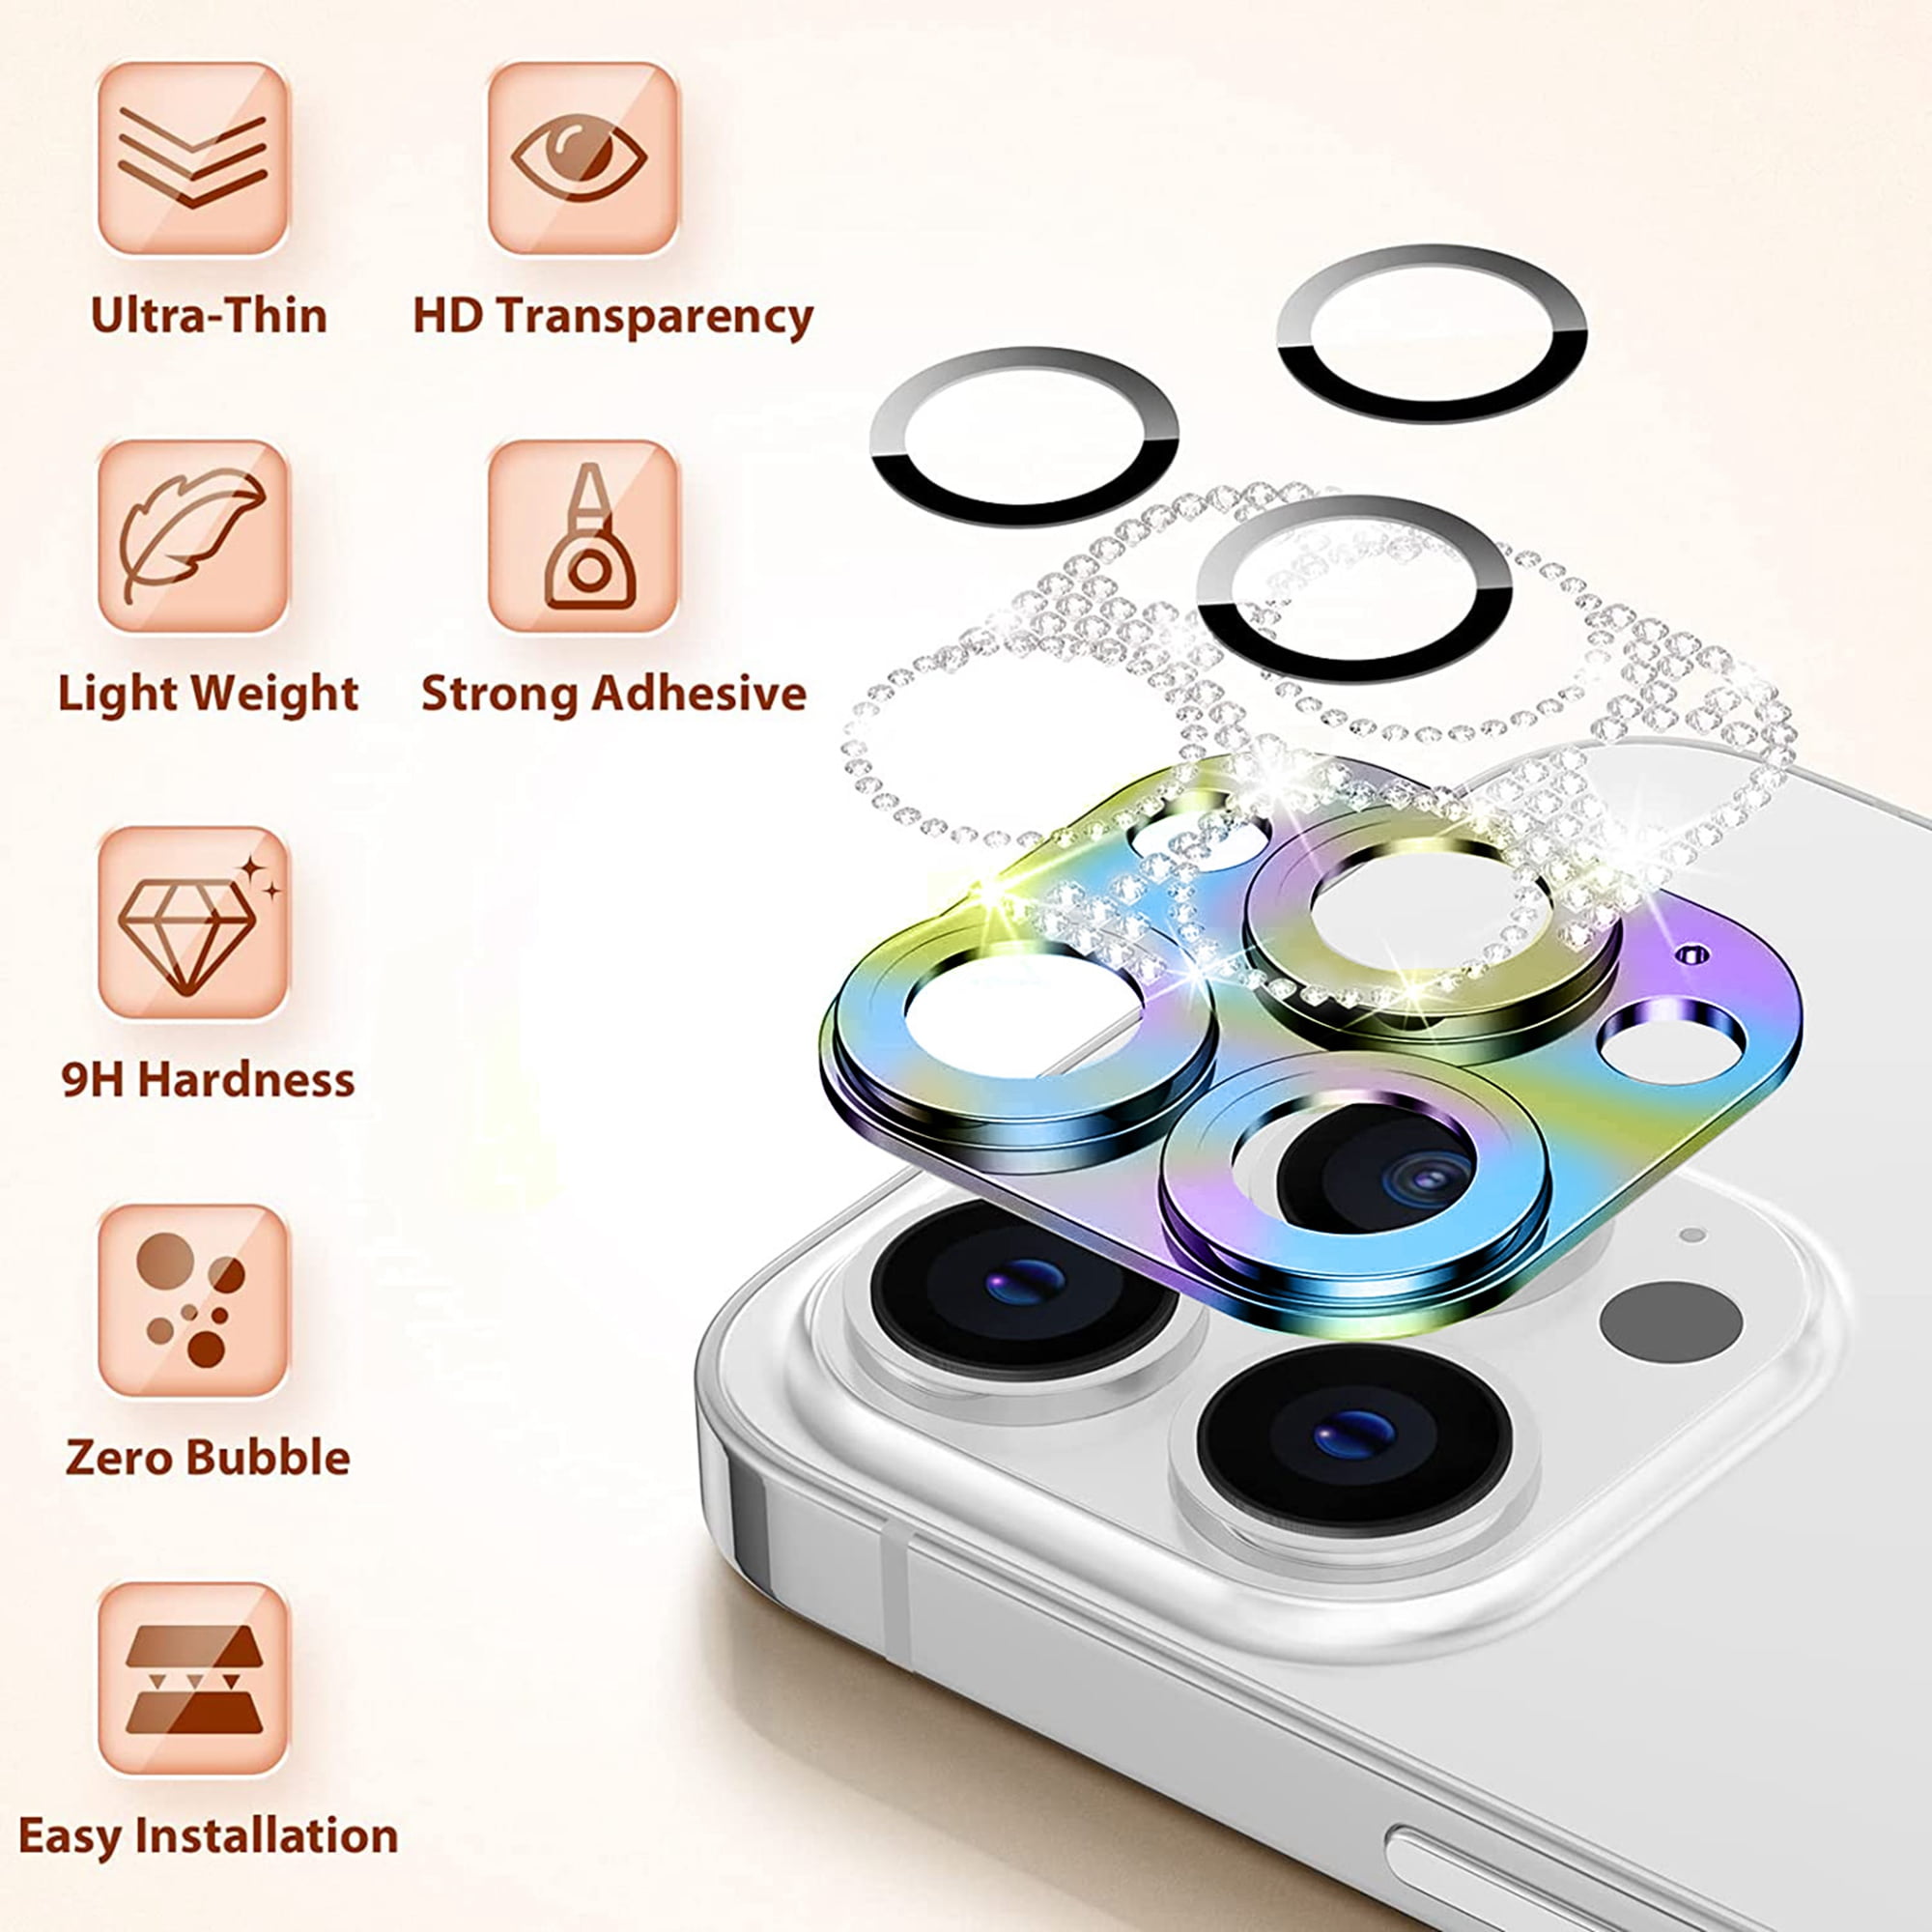  Tomcrazy Gold Rear Camera Decorations for iPhone 11 Pro Max  Diamond Lens Cover Protective Ring Decorate Sticker Protector : Cell Phones  & Accessories